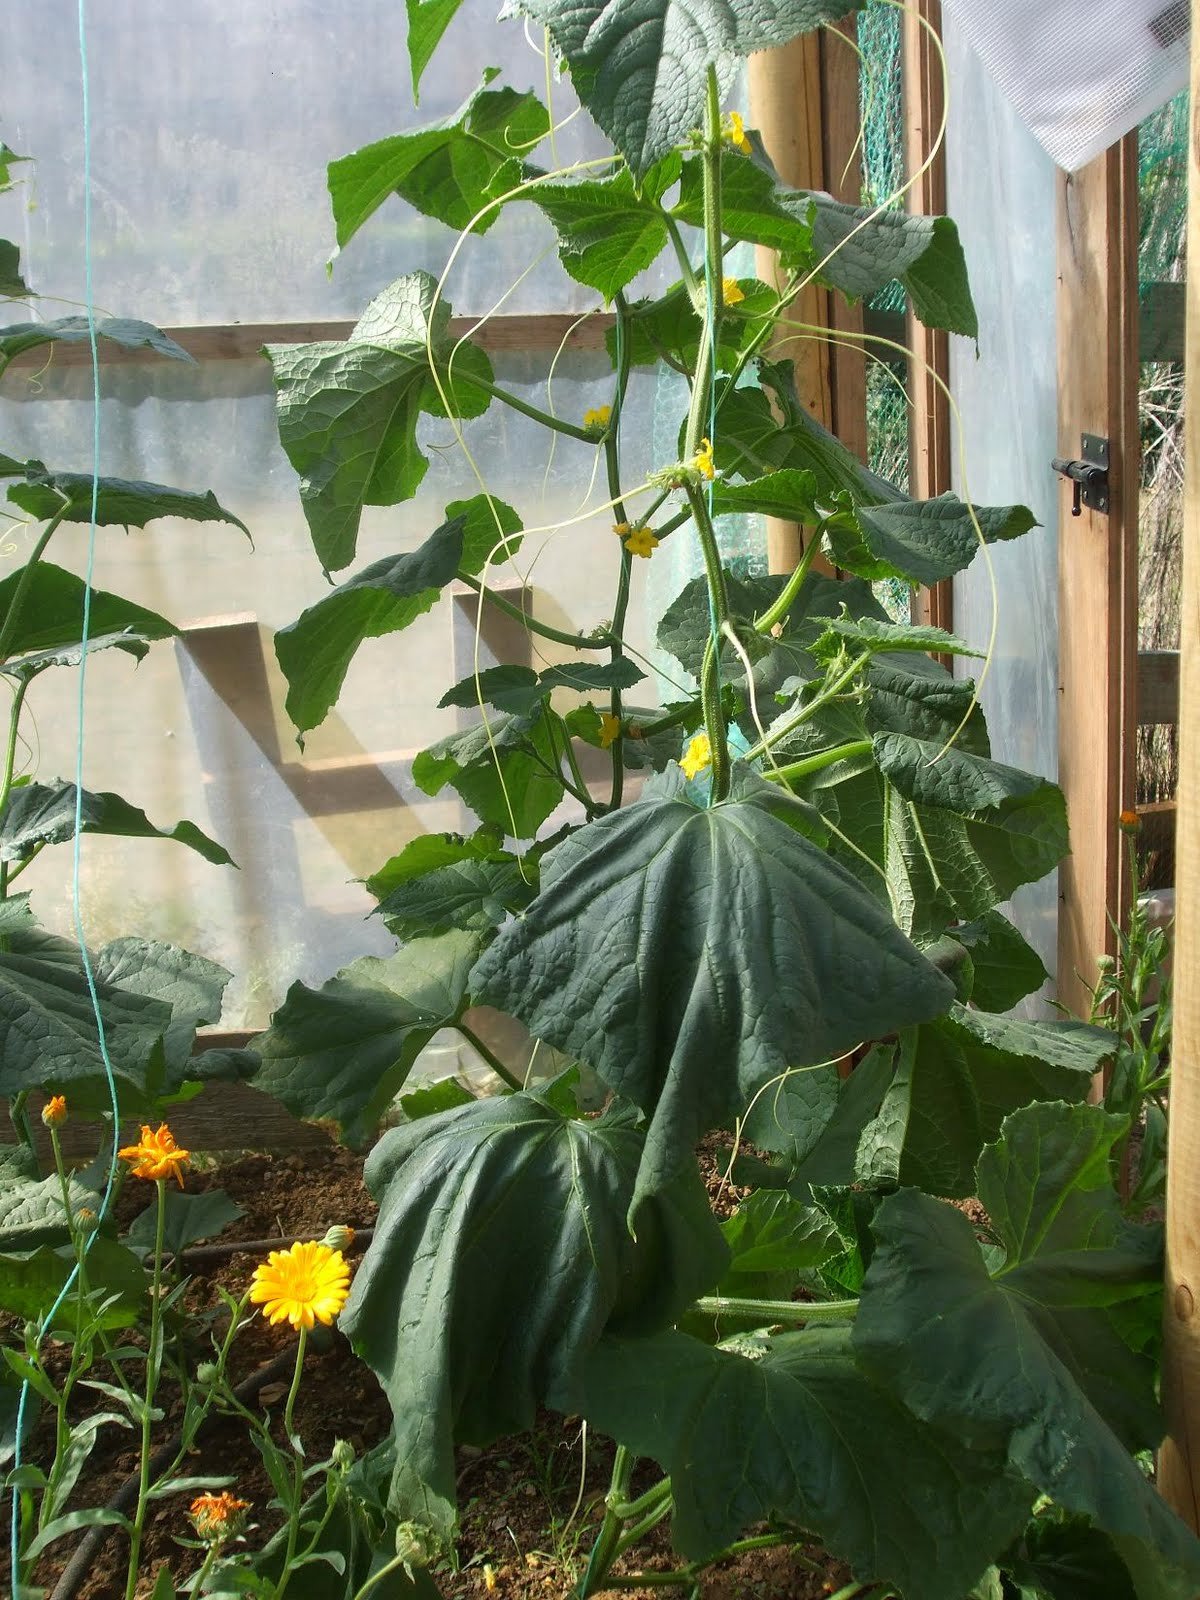 How to Revive Wilted Cucumber Plant